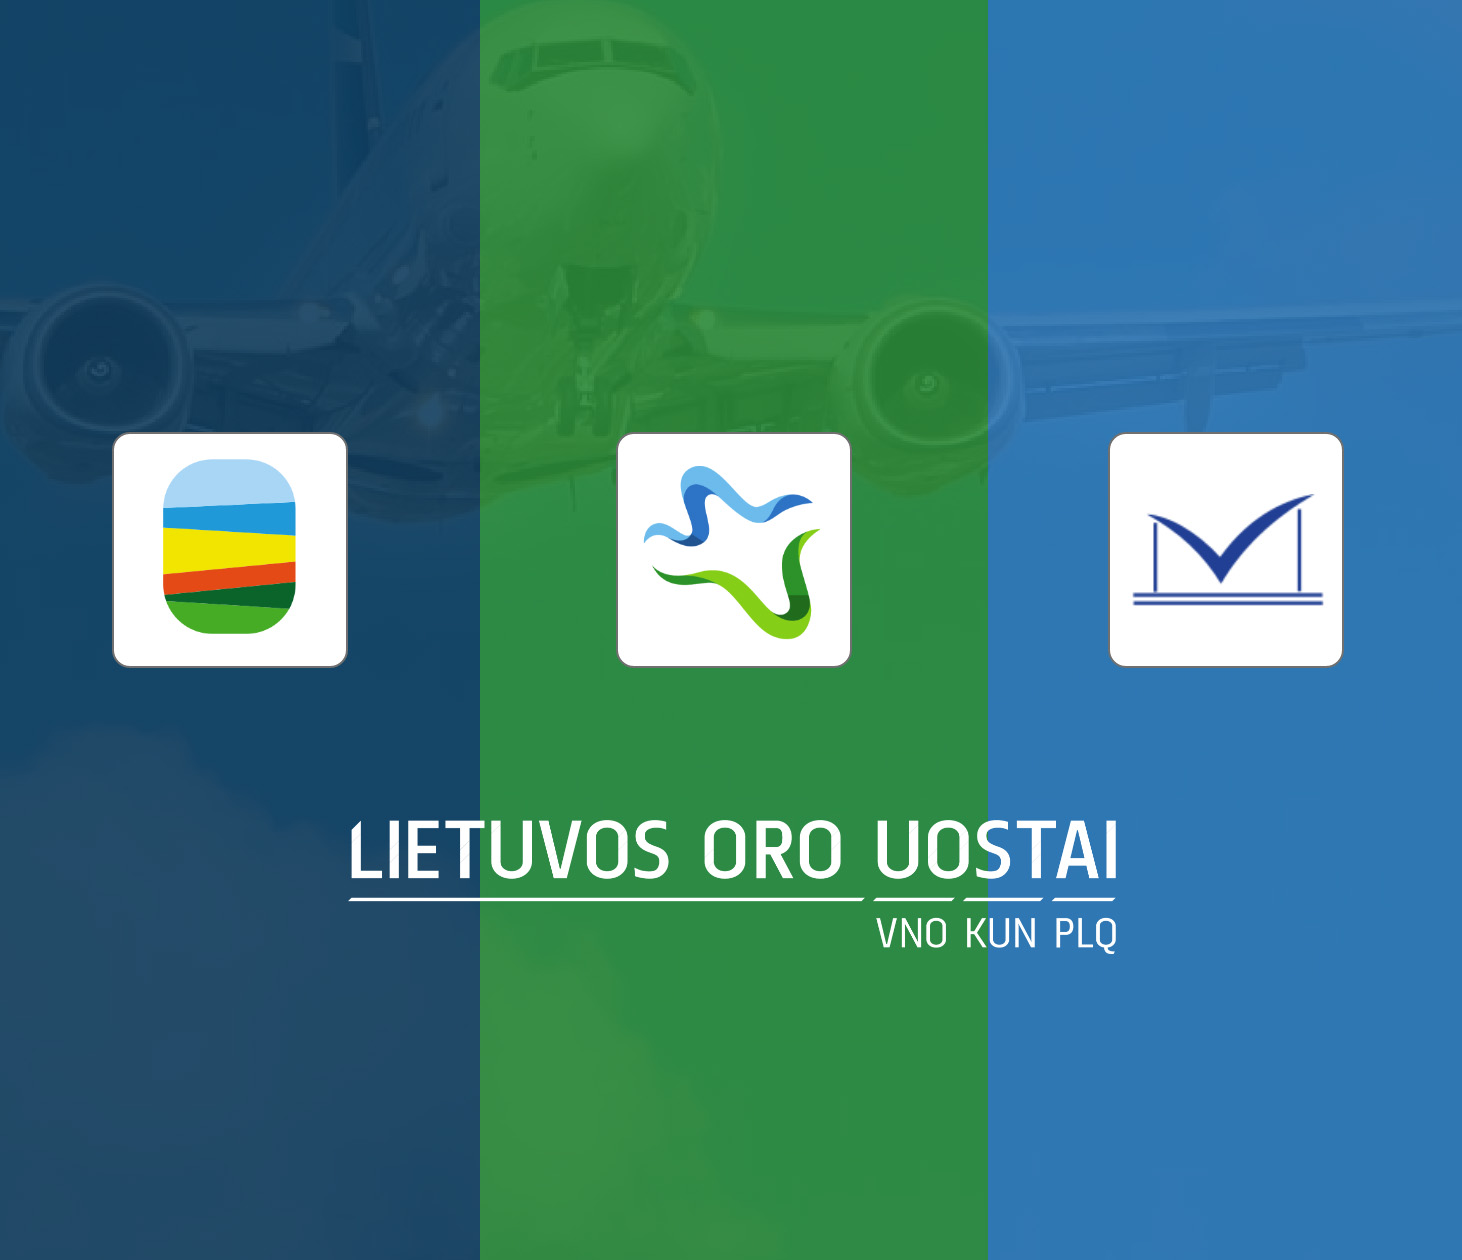 Online platform for Lithuanian airports